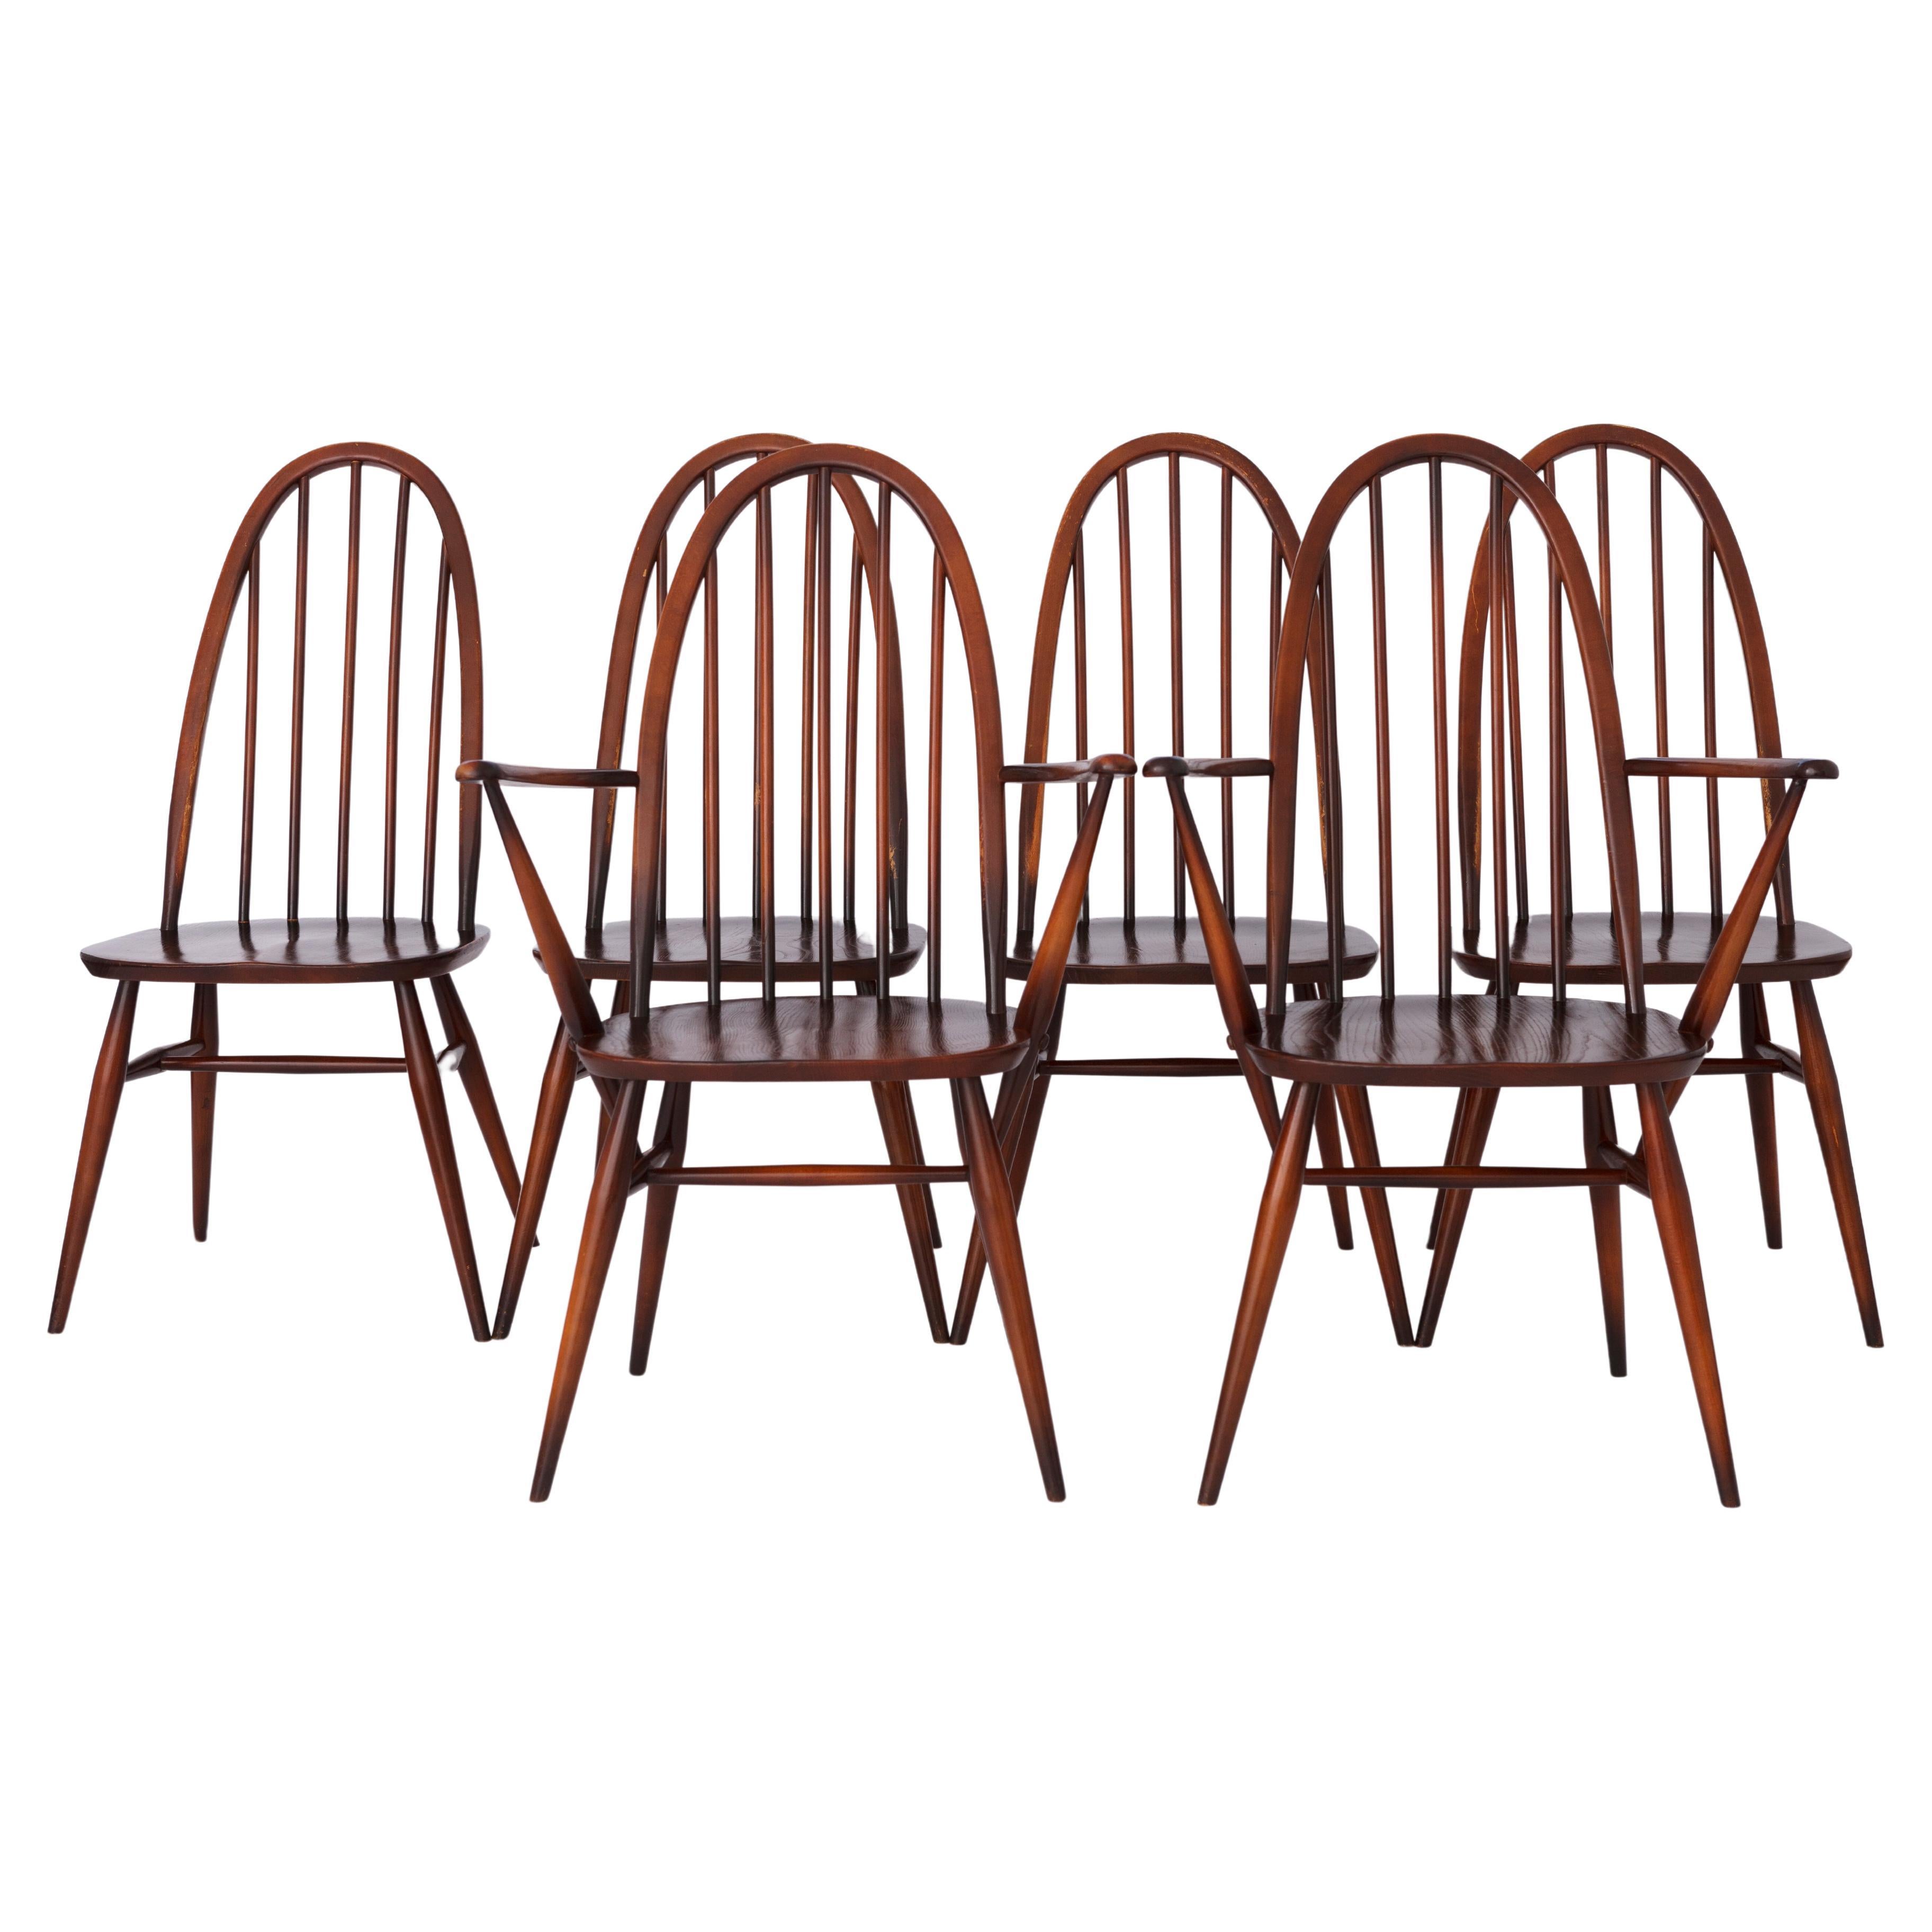 Set of 6 Ercol 365 Quaker Windsor Chairs, 1960s Vintage, England For Sale